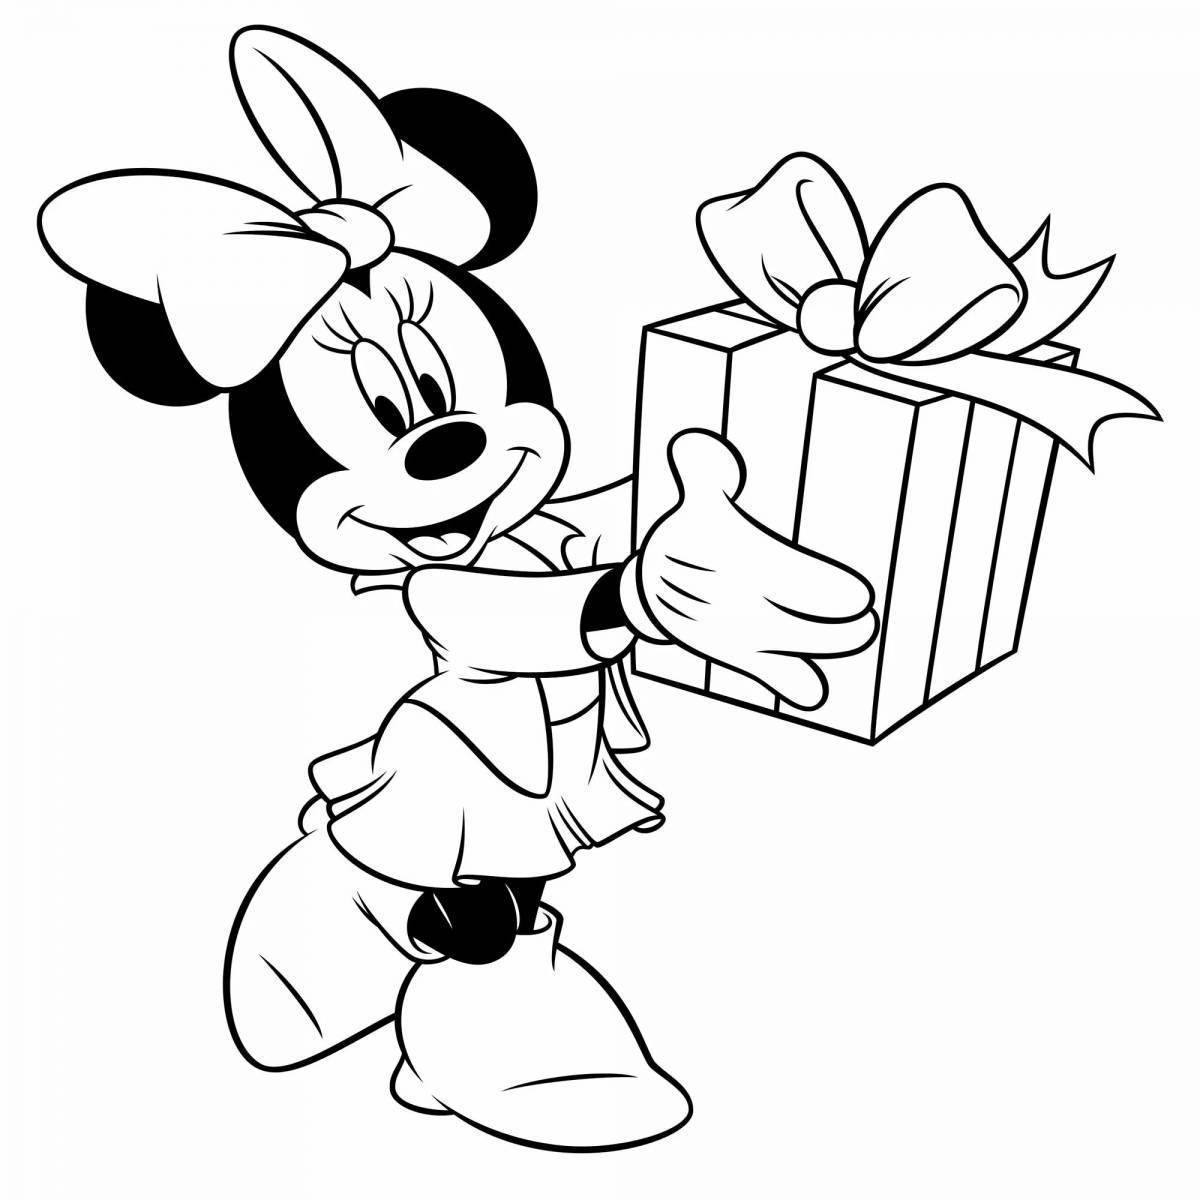 Minnie's colorful coloring page